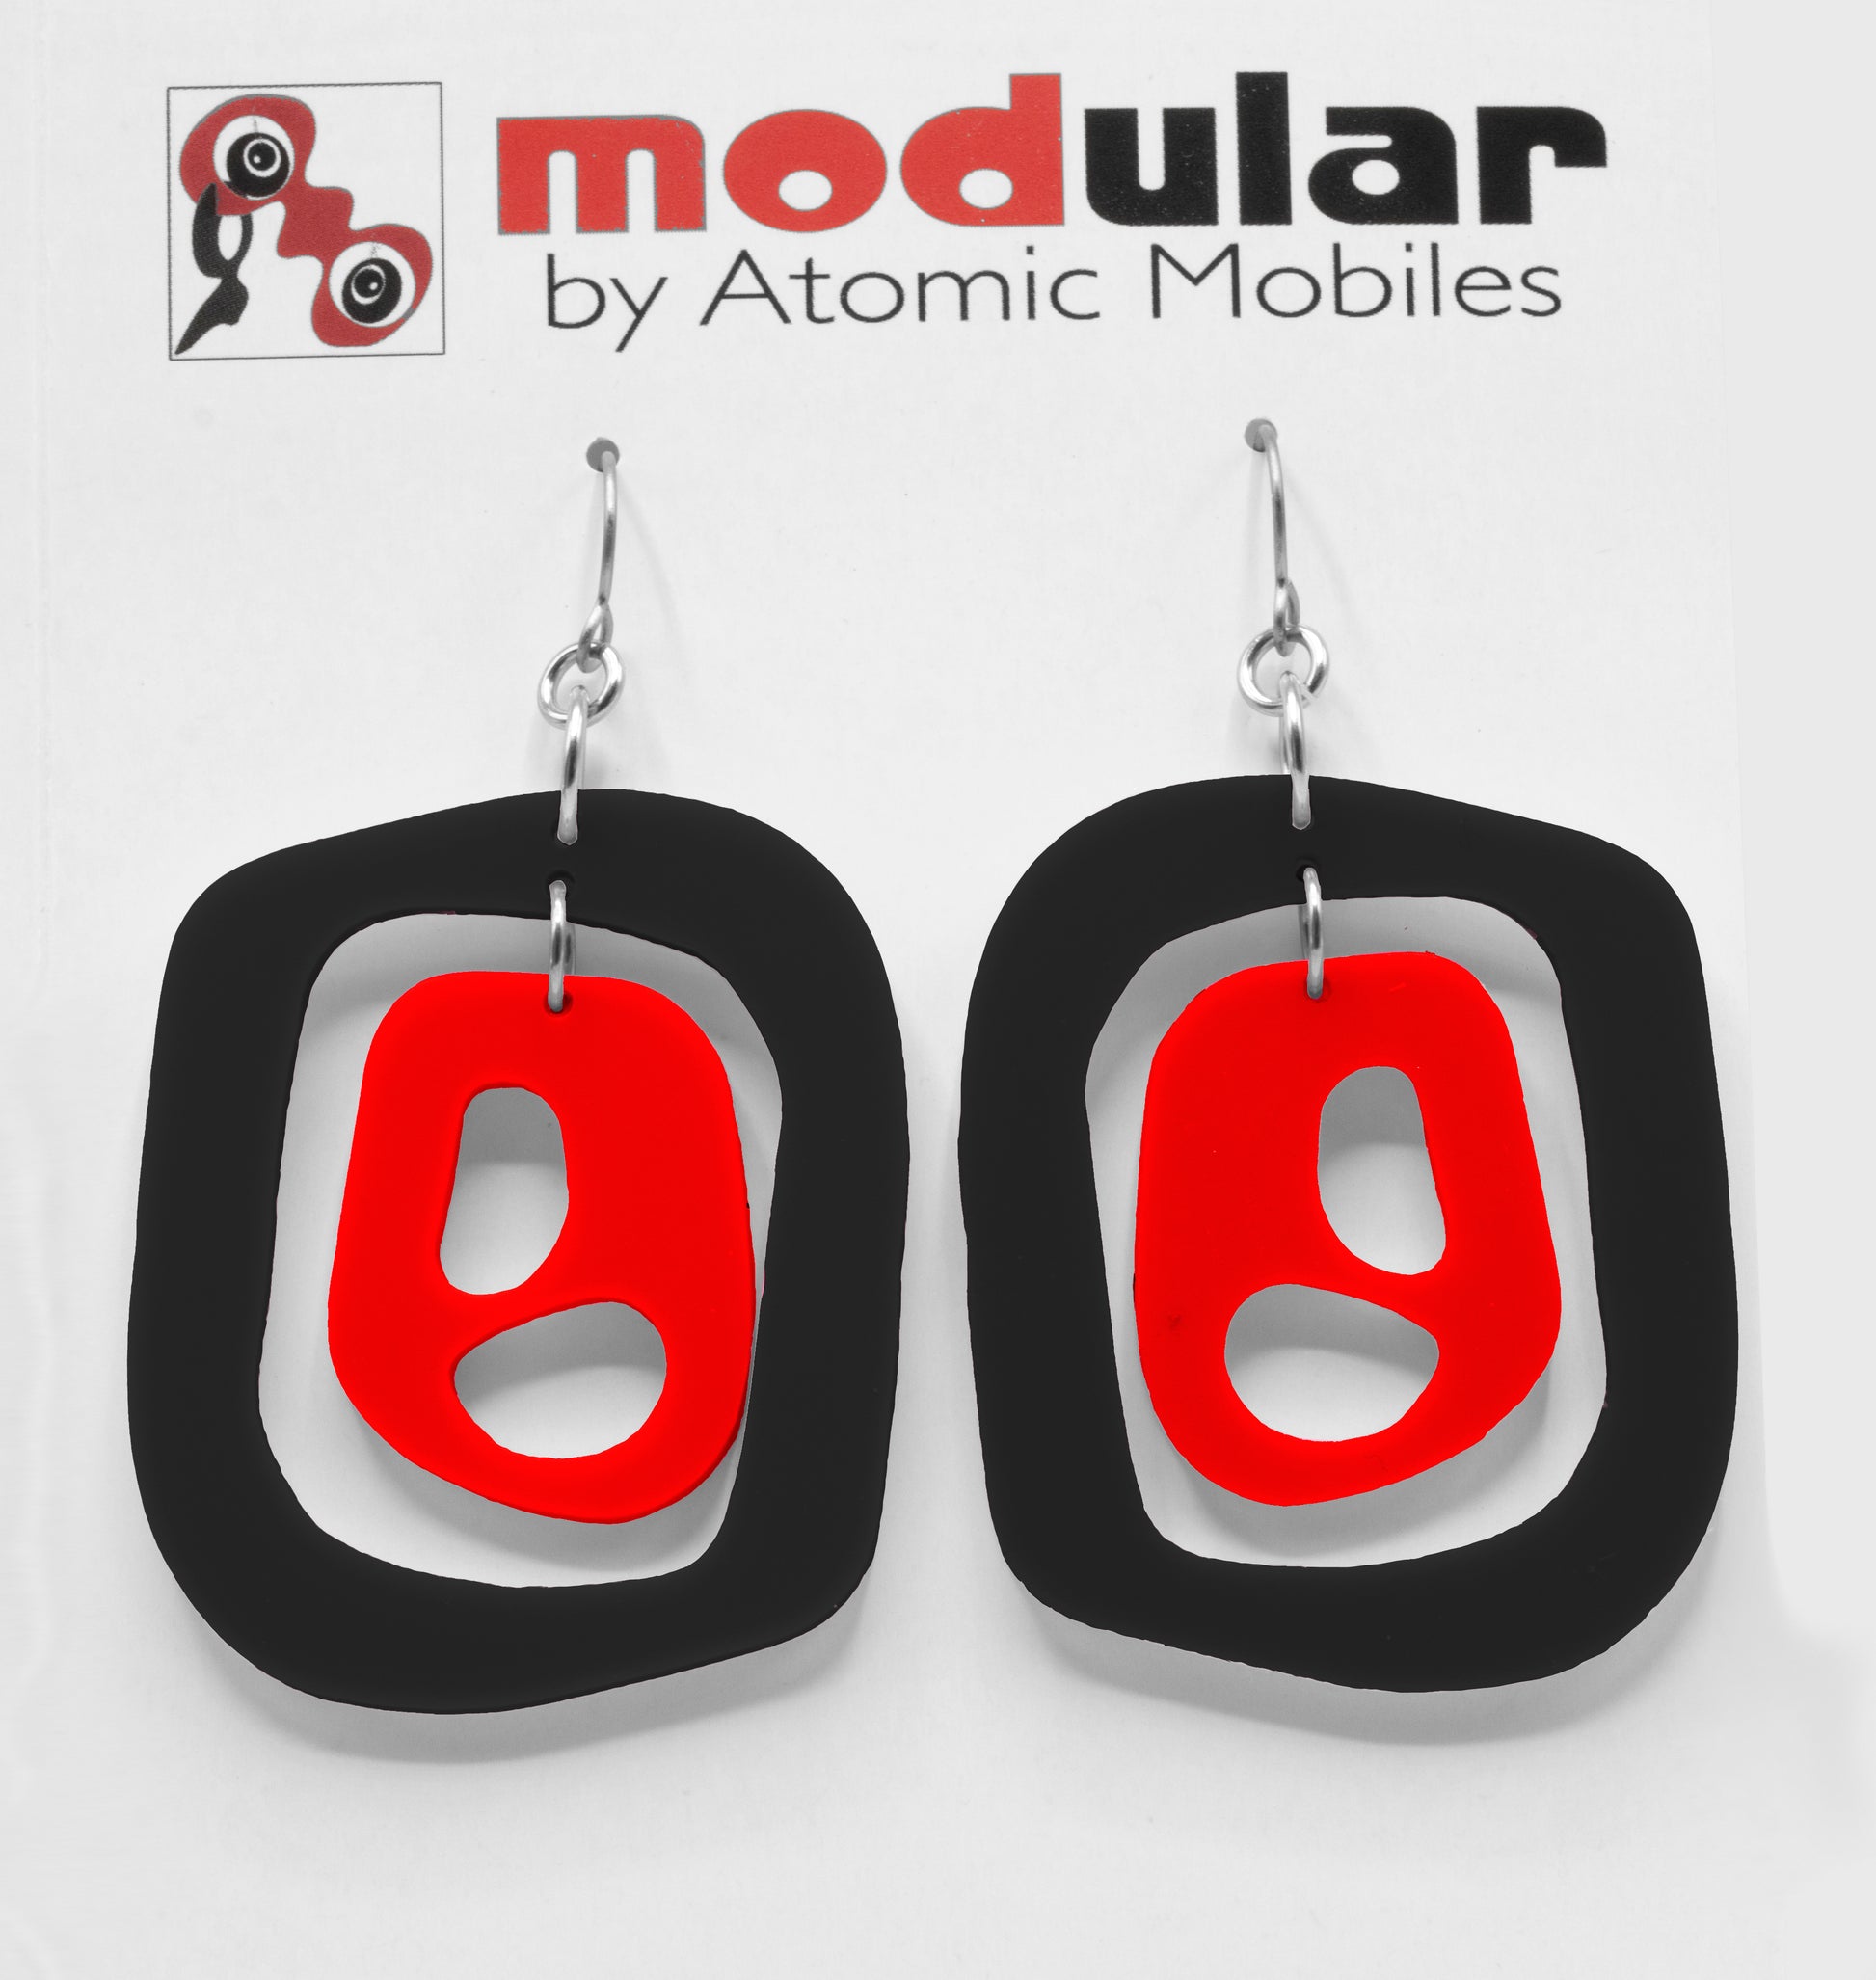 MODular Earrings - Mid 20th Statement Earrings in Black and Red by AtomicMobiles.com - retro era mod handmade jewelry